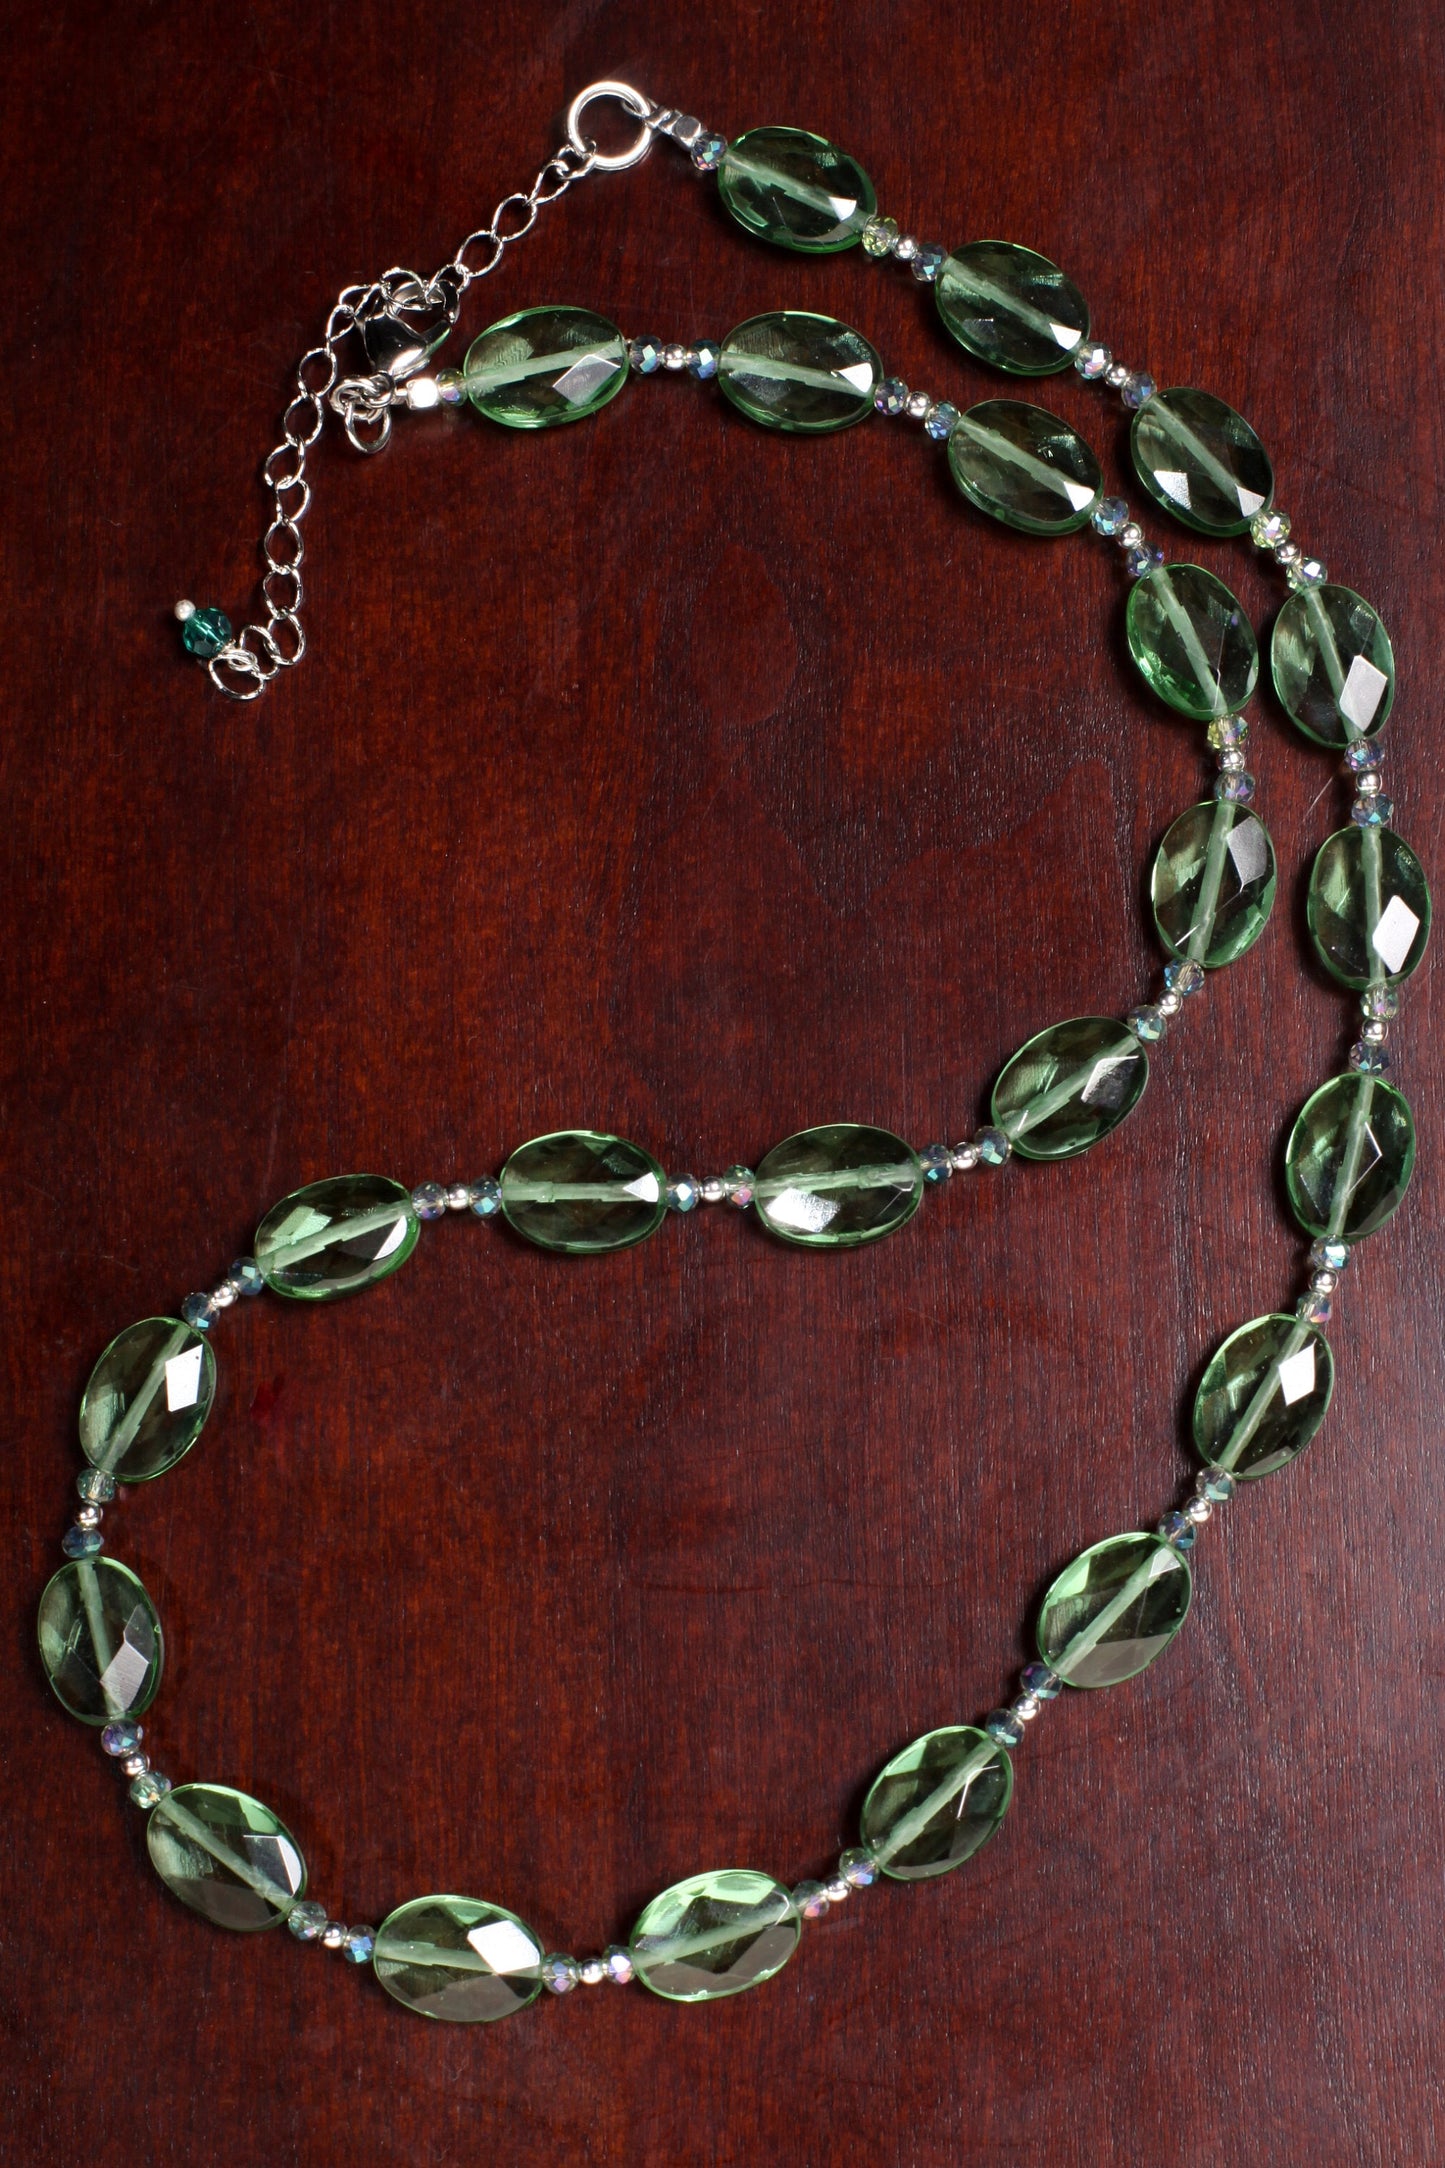 Green Quartz Faceted Oval, Matching Crystal Accent Beads 20.5" Necklace with 3" Extension Chain